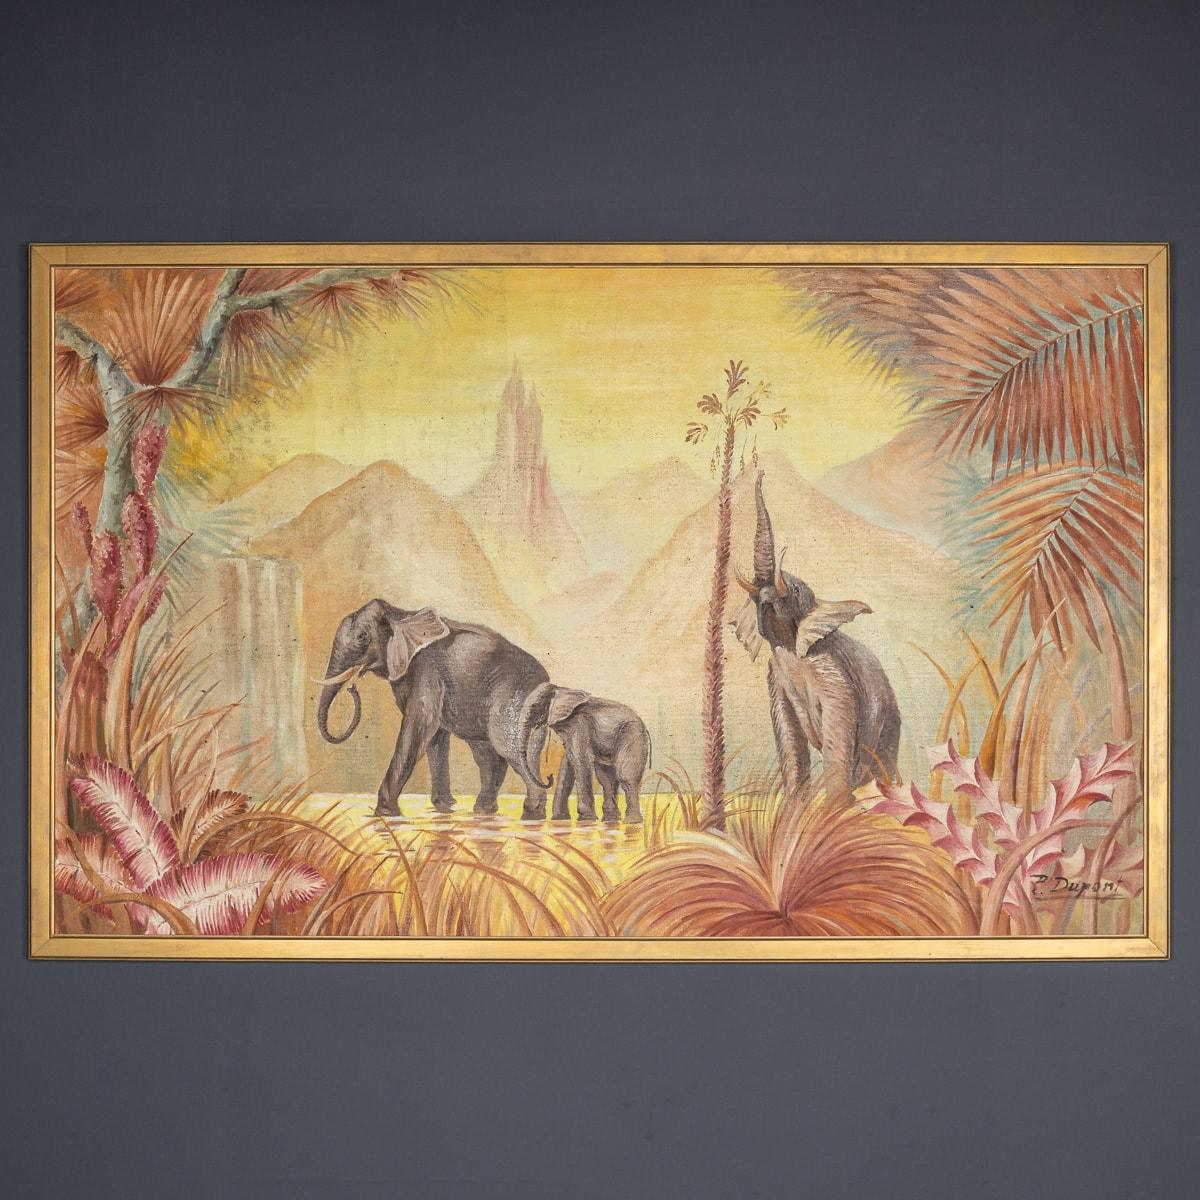 A stunning piece of mid 20th Century oil painting, showing a family of elephants strolling through the jungle. The parents lead their young amidst the greenery. It's a nice piece for any home, fitting well with modern, classic, or retro styles. The